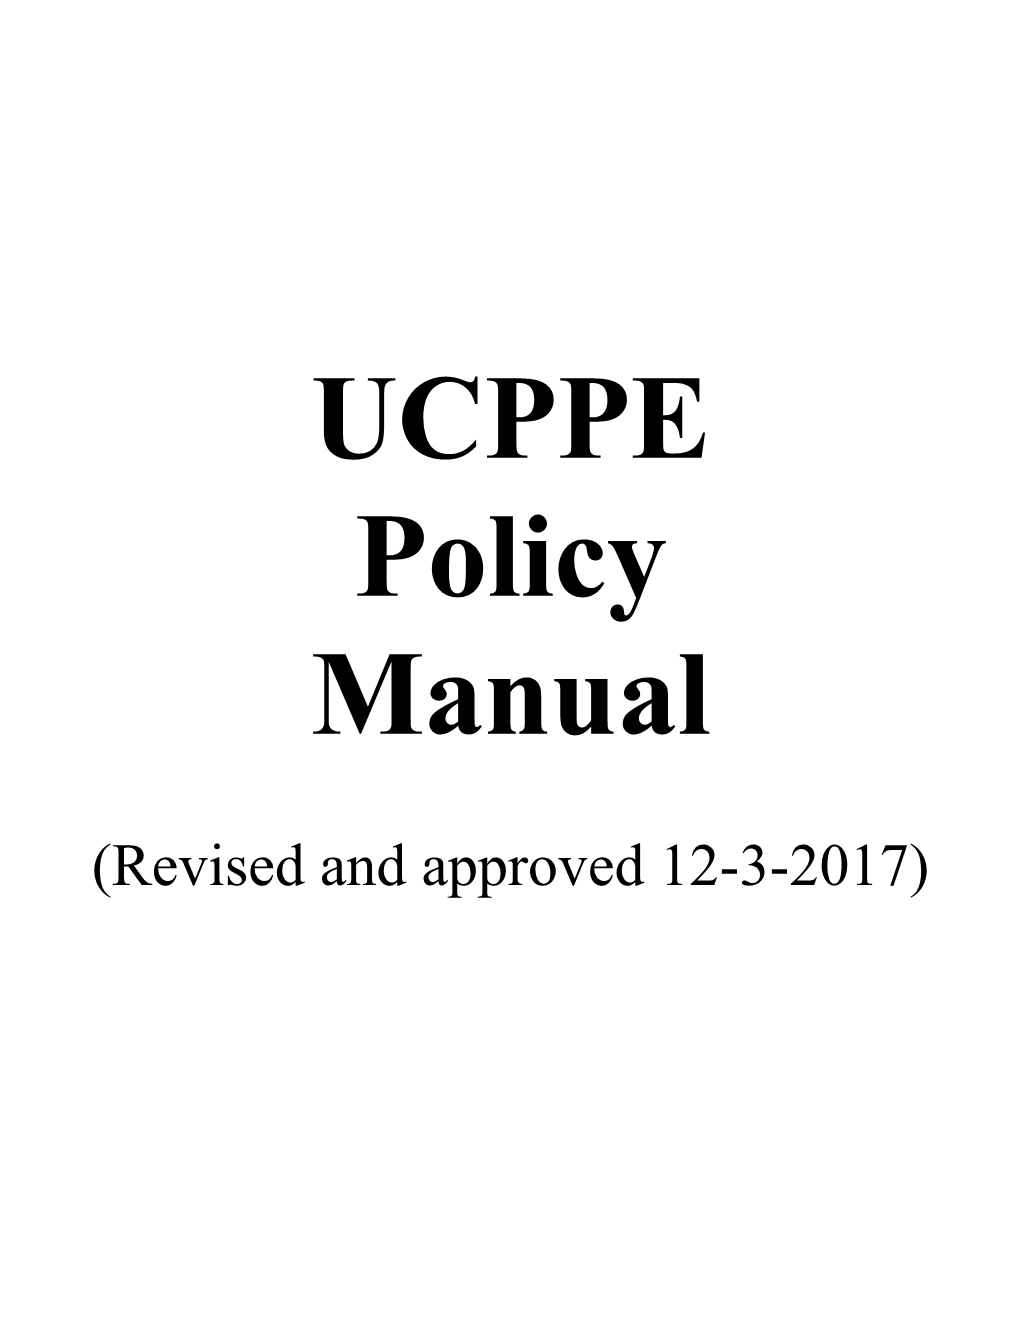 UCPPE - Policy Manual 2010 (Revised)